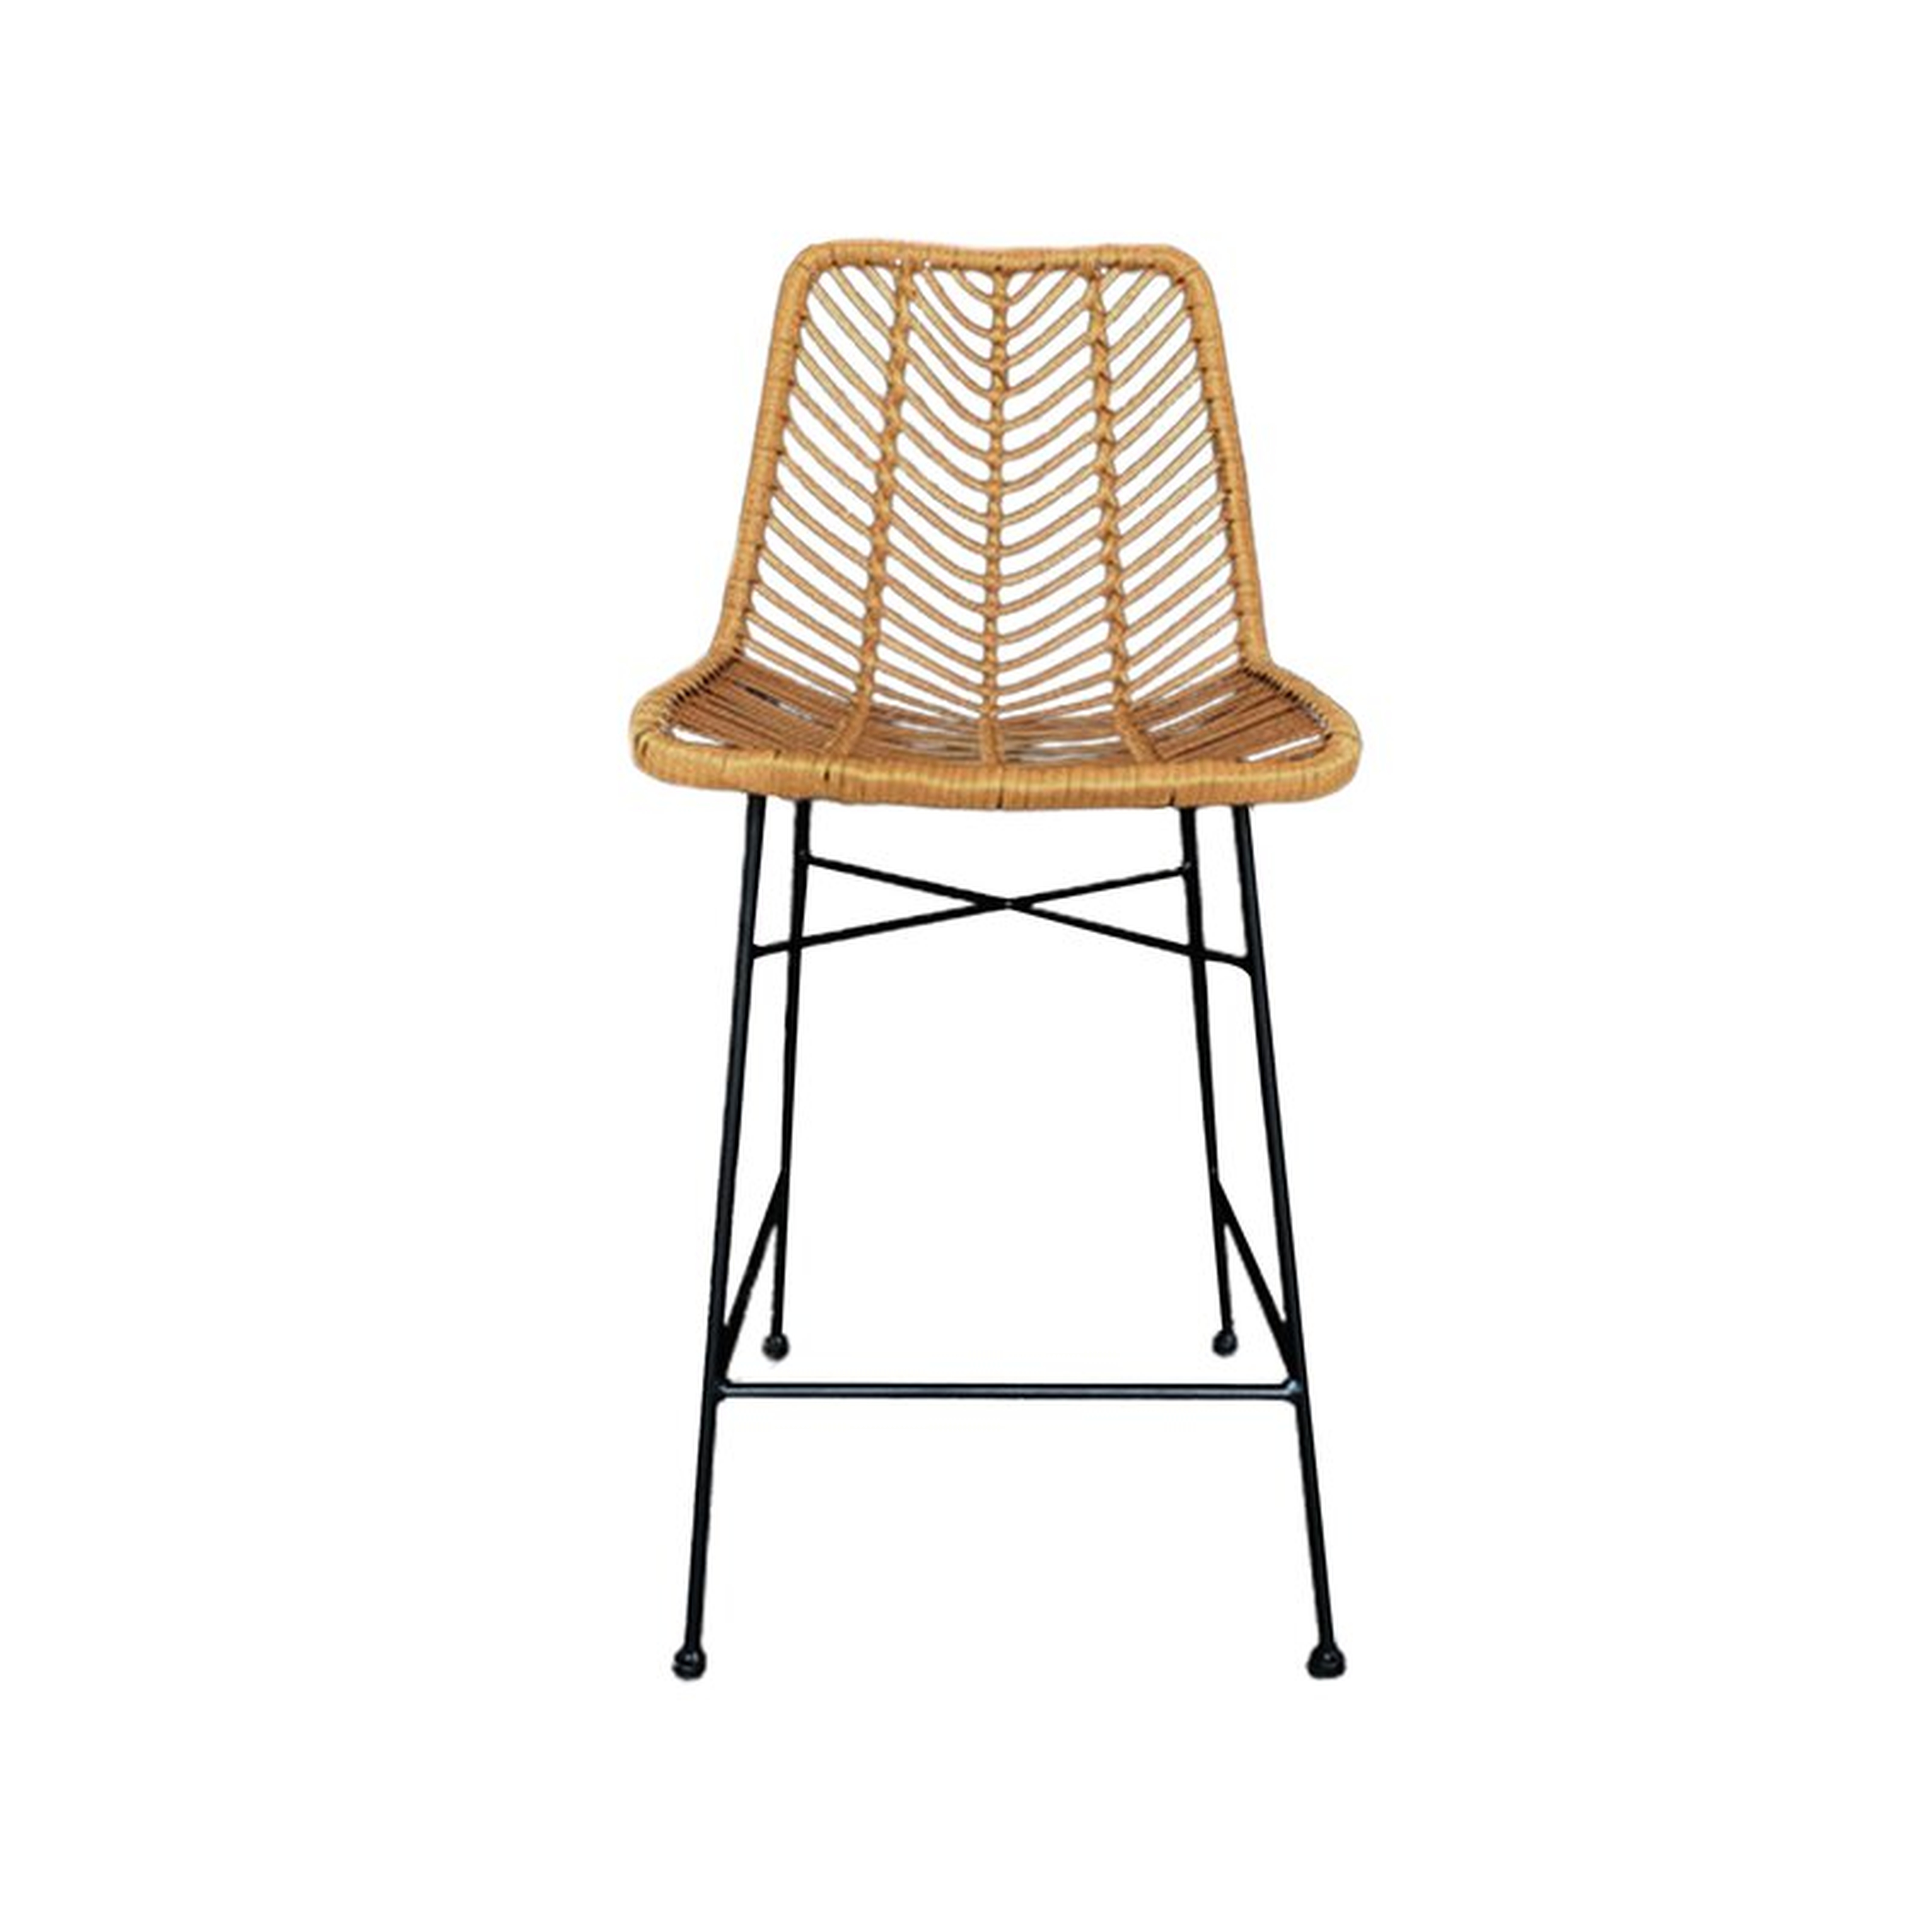 Rattan Bar Stool With Black Metal Frame, Use For Indoor And Outdoor Bars, Kitchen Island - Comfortable Design And Durable Metal Frame - Wayfair